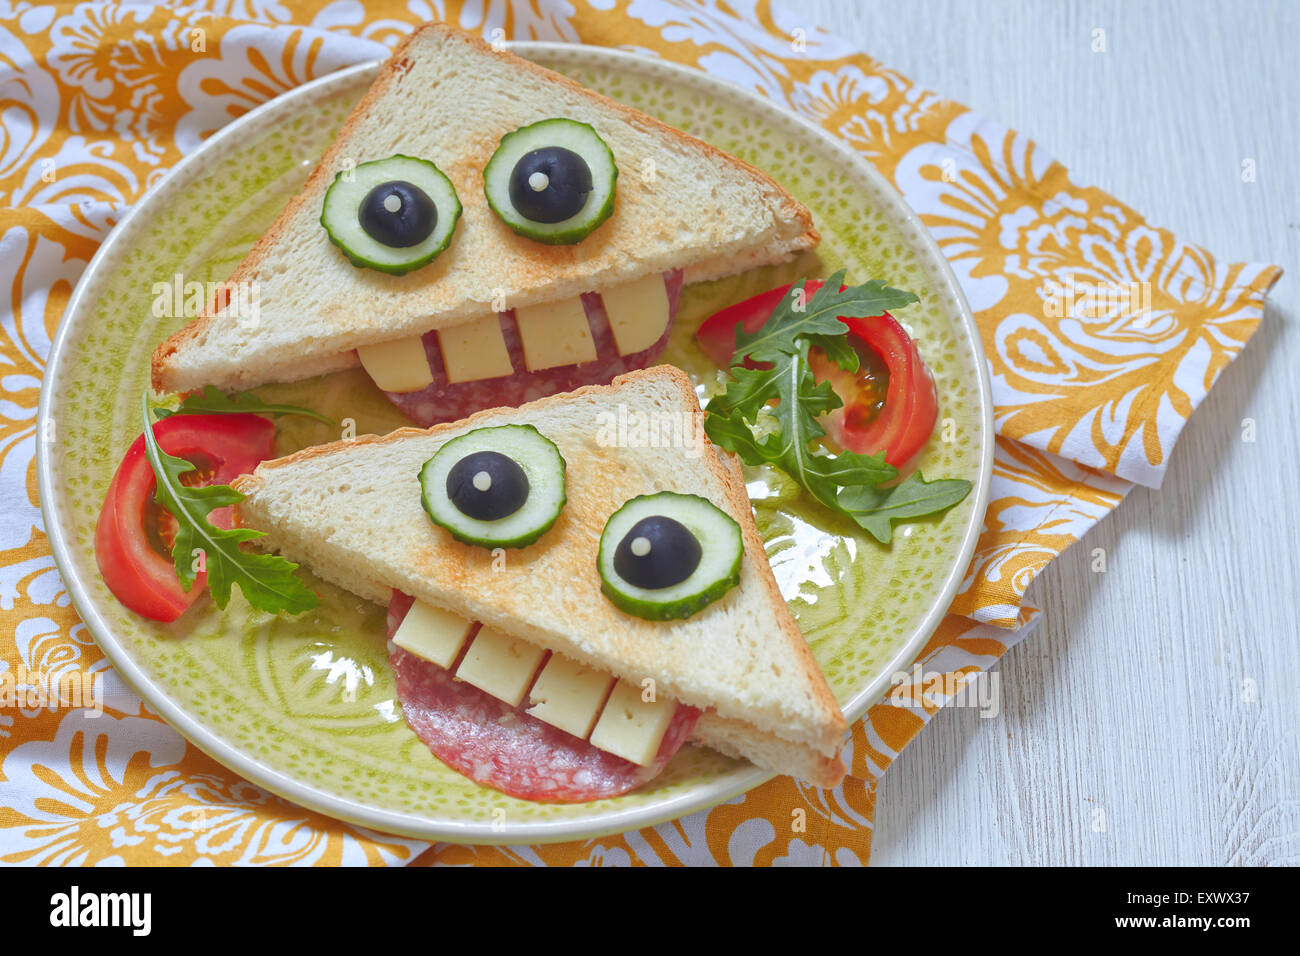 Funny sandwich for kids lunch on a table Stock Photo